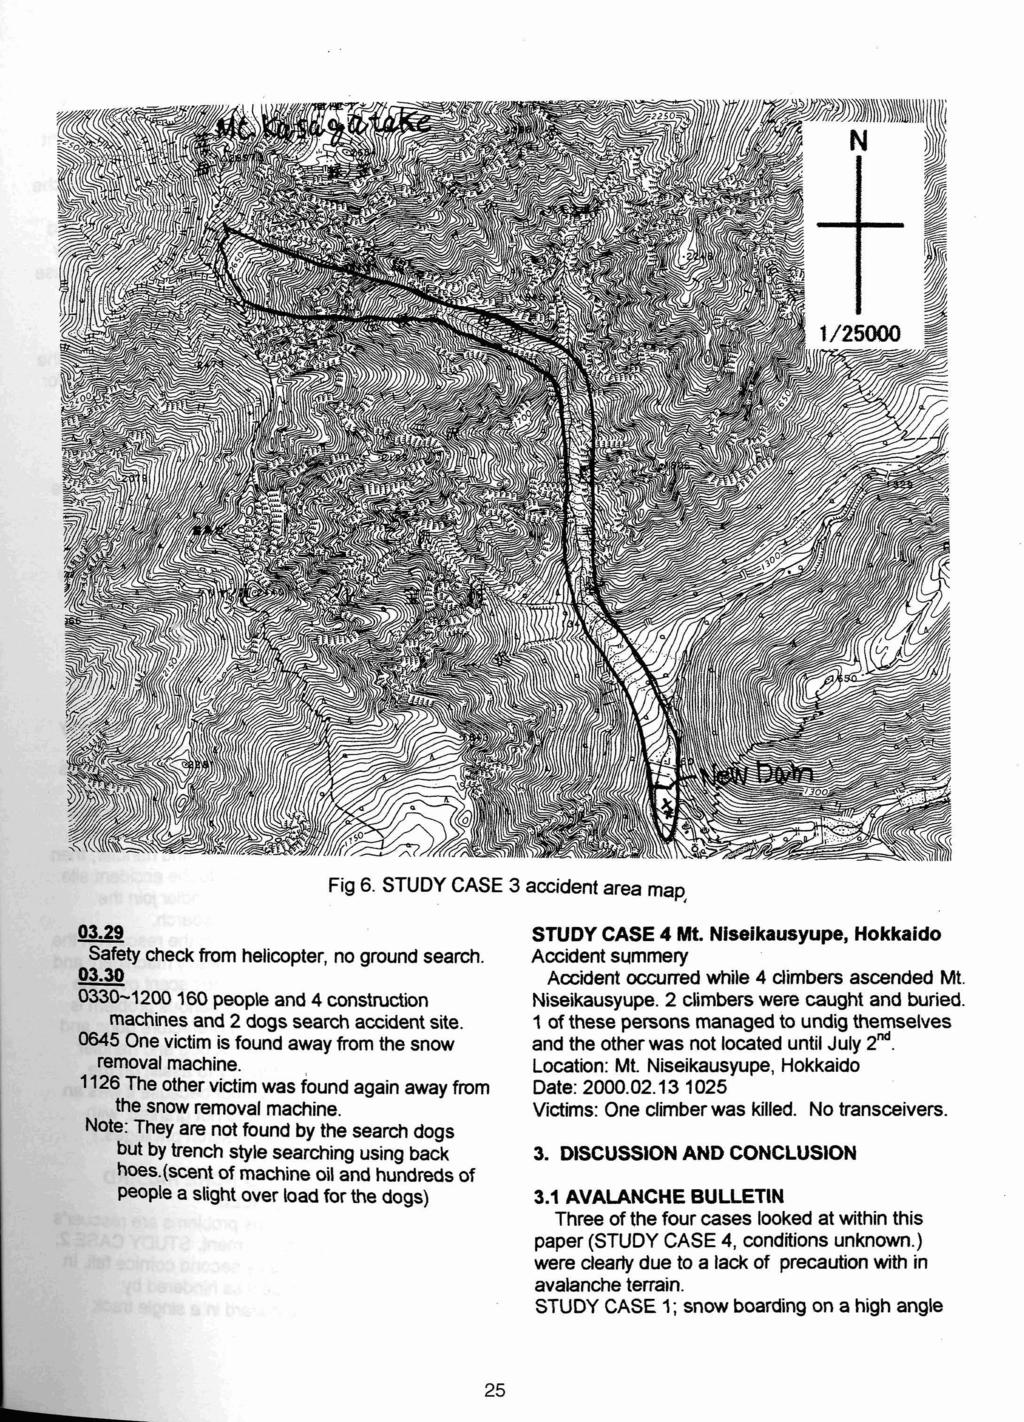 Fig 6. STUDY CASE 3 accident area map, 03.29 STUDY CASE 4 Mt. Niseikausyupe, Hokkaido Safety check from helicopter, no ground search. 03.30 0330-1200160 people and 4 construction machines and 2 dogs search accident site.